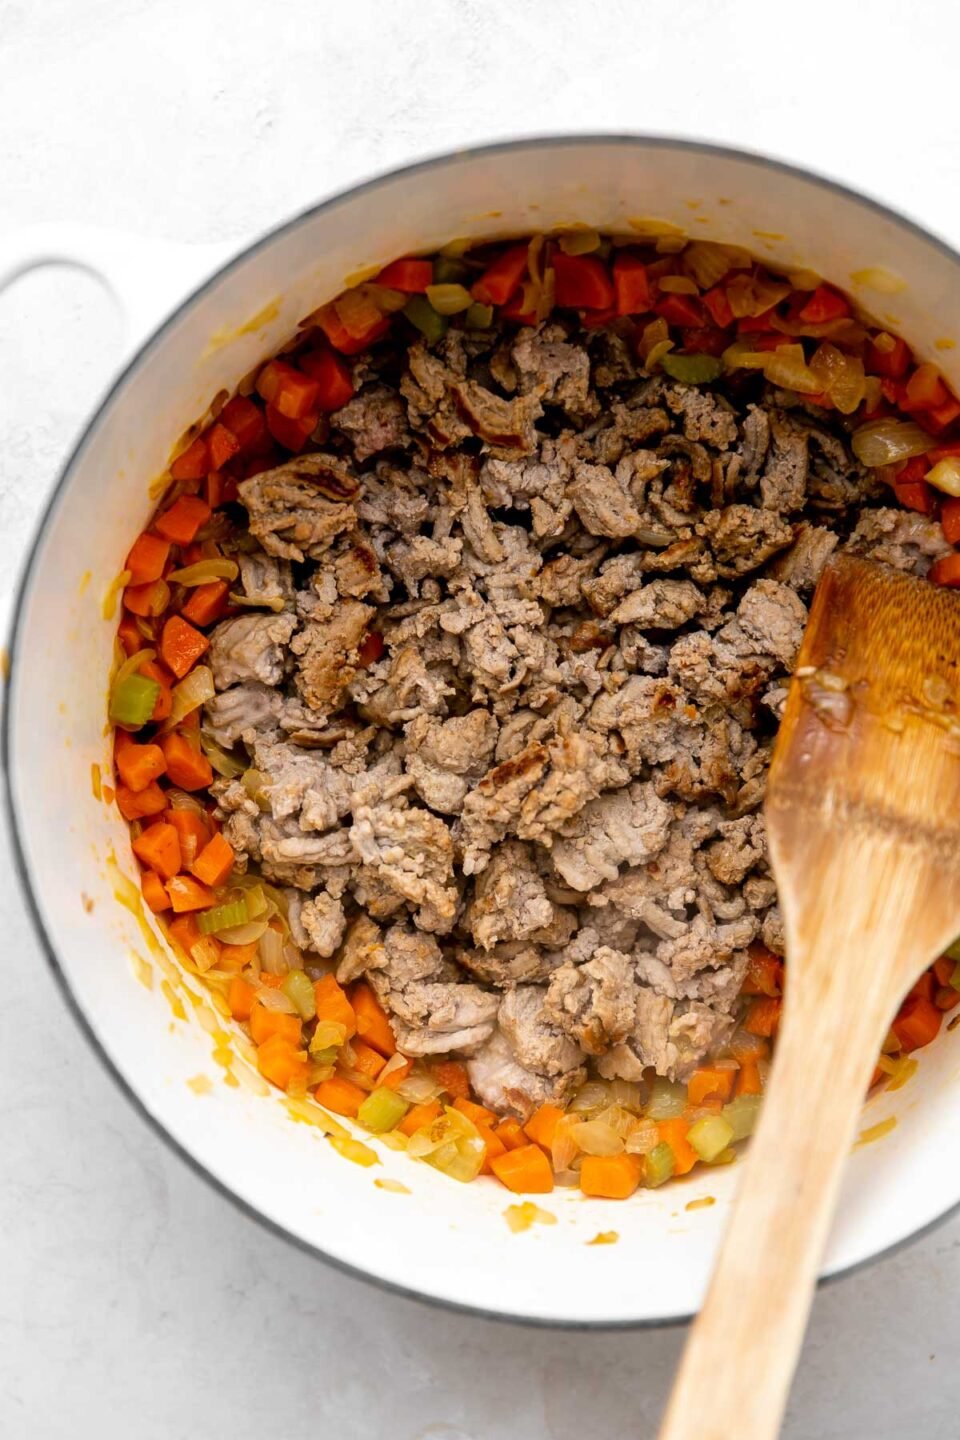 Soffrito mixture is pushed to the outer edges of a white pot, and the browned turkey sits in the center. The pot is sitting on a white and grey marbled surface. A wooden spoon rests on top of the pot.